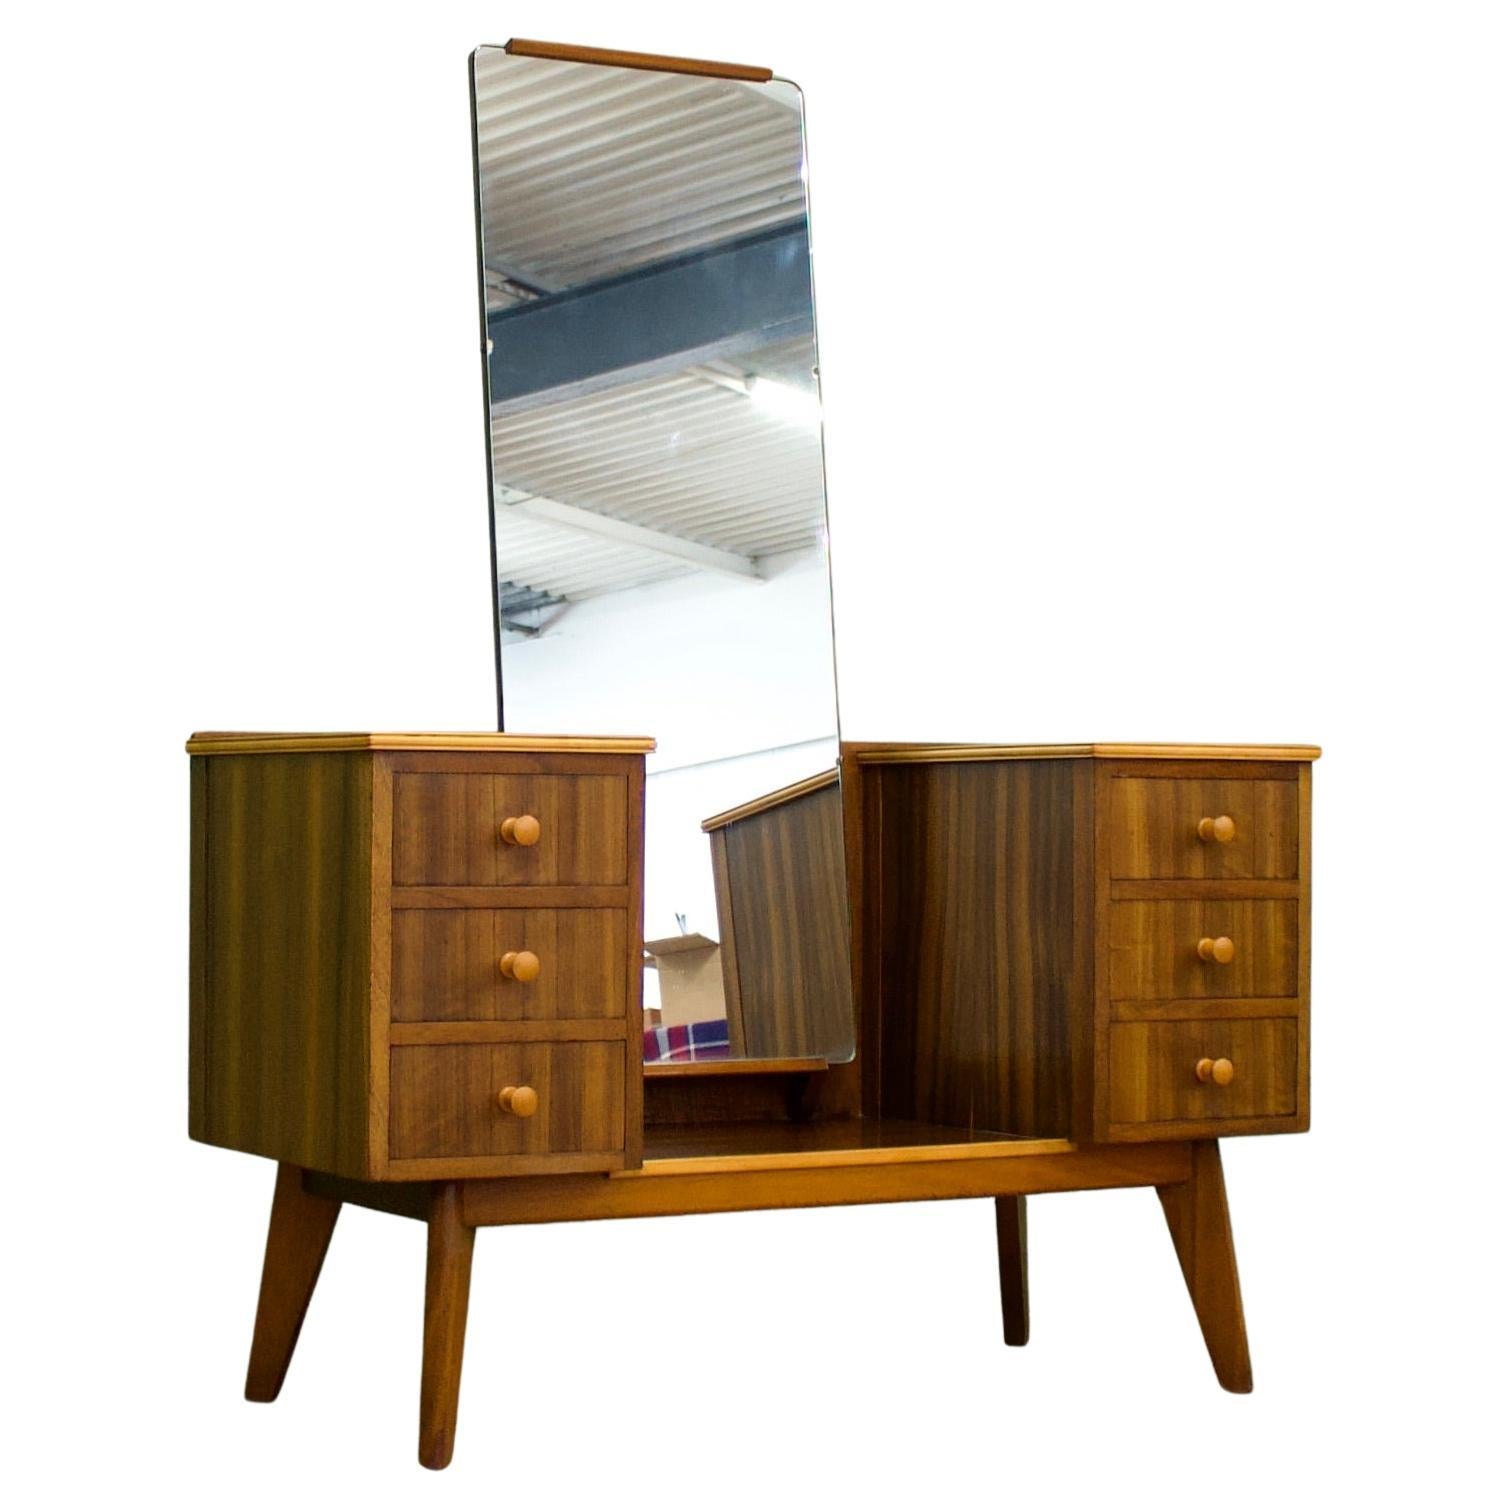 Mid Century Vintage Dressing Table in Walnut from Morris of Glasgow, 1950s For Sale